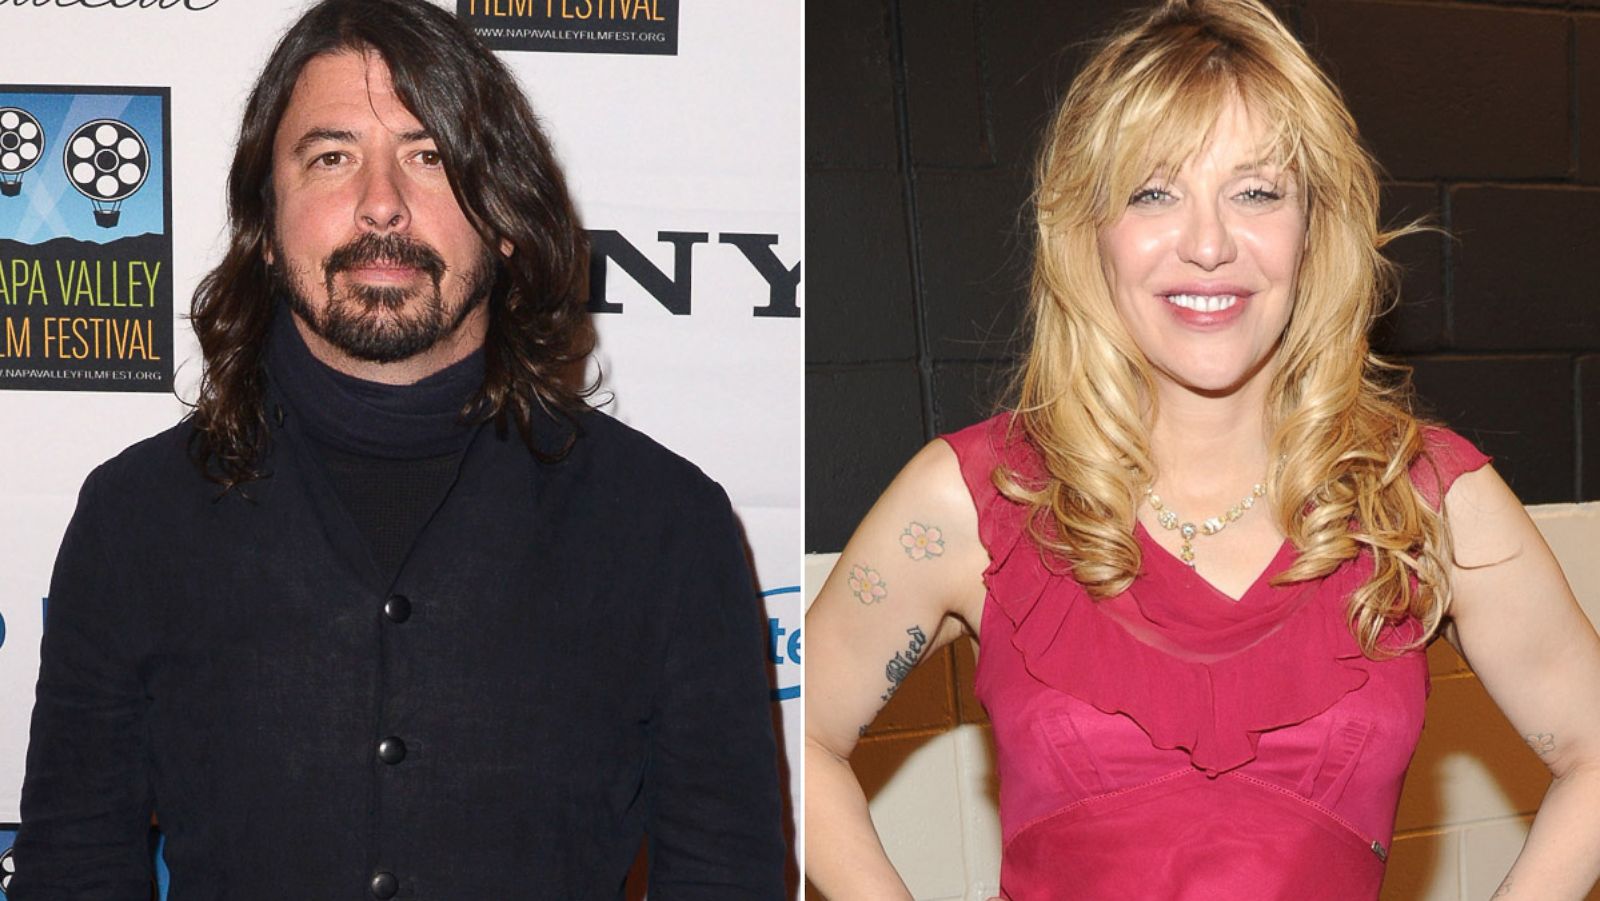 Courtney Love Ends Her Year Feud With Dave Grohl Krist Novoselic Abc News